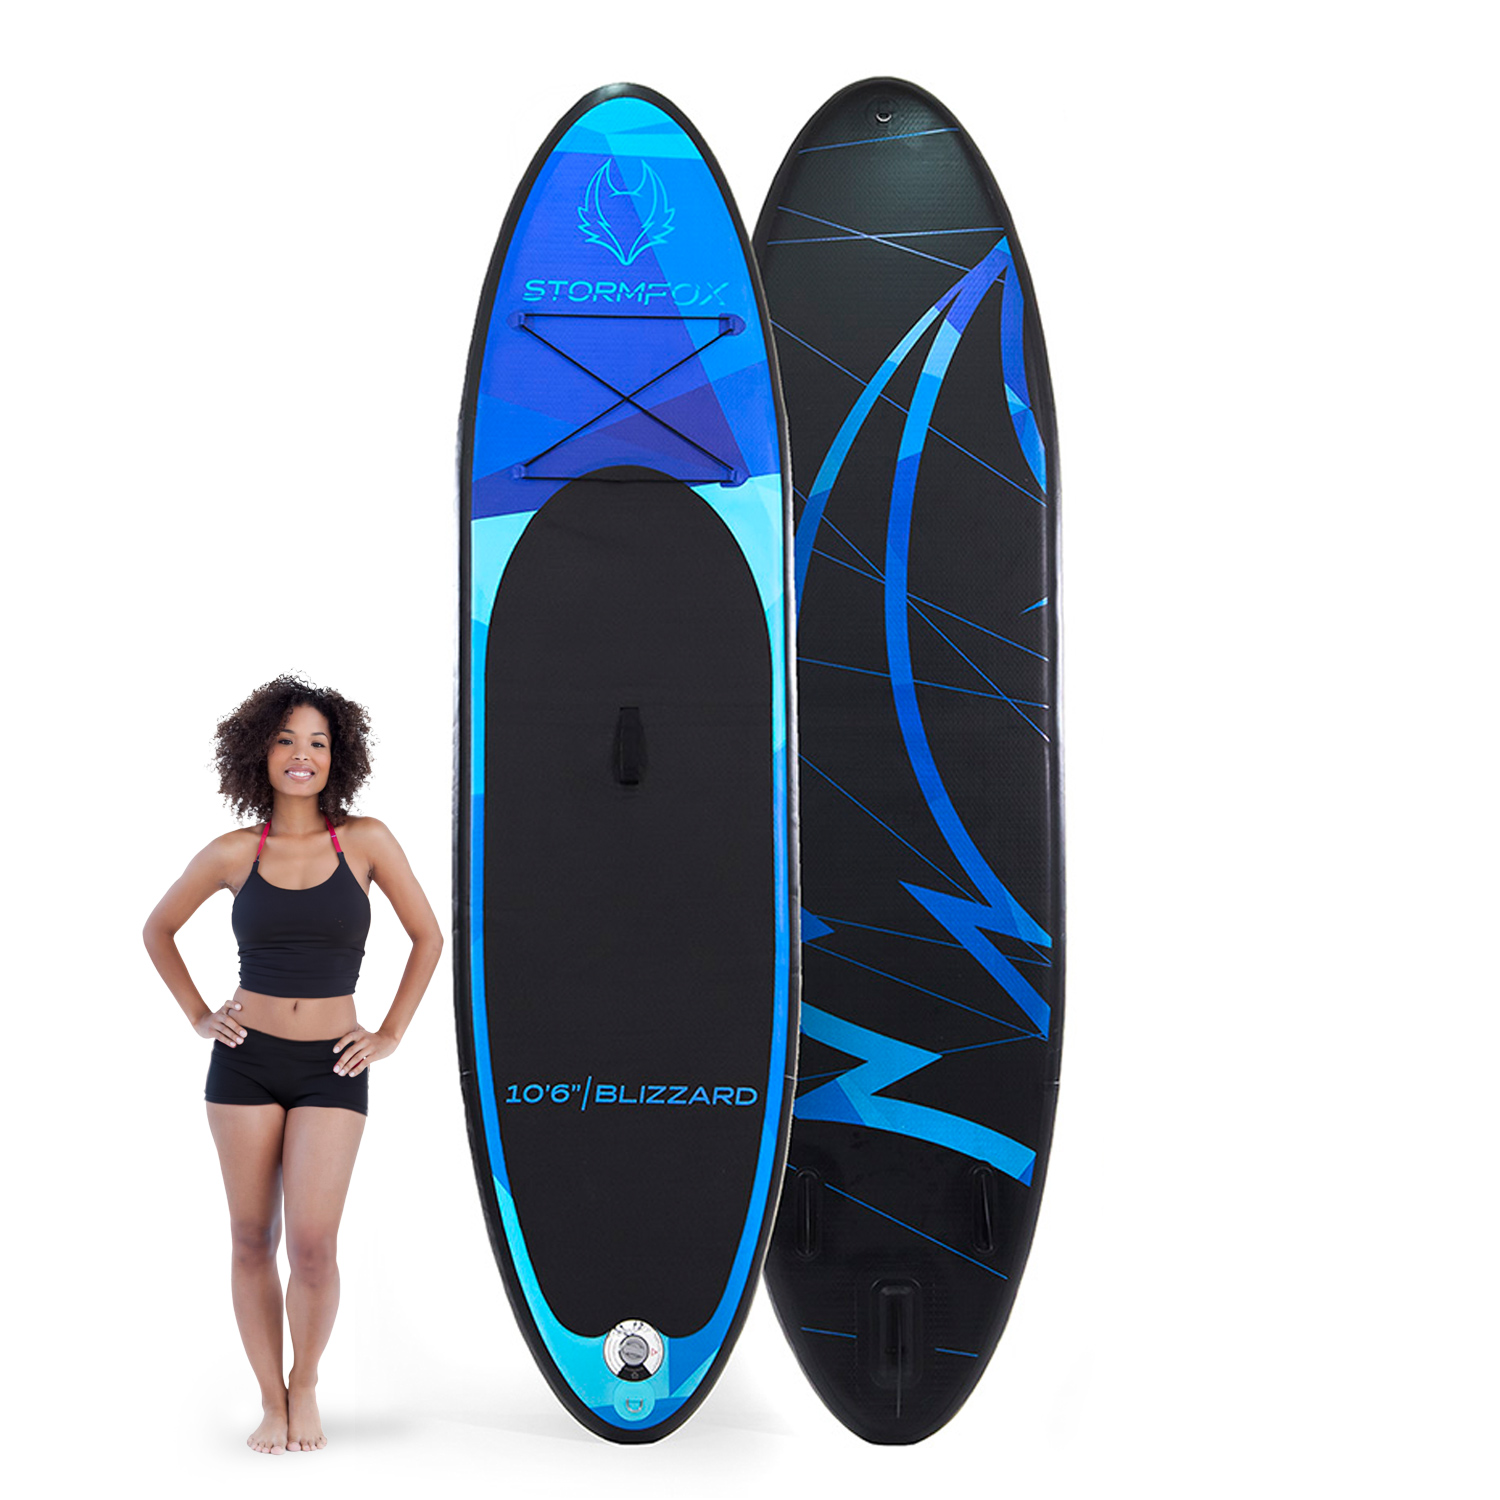 Blizzard Stand Up Paddle Board Kit - 10' 6